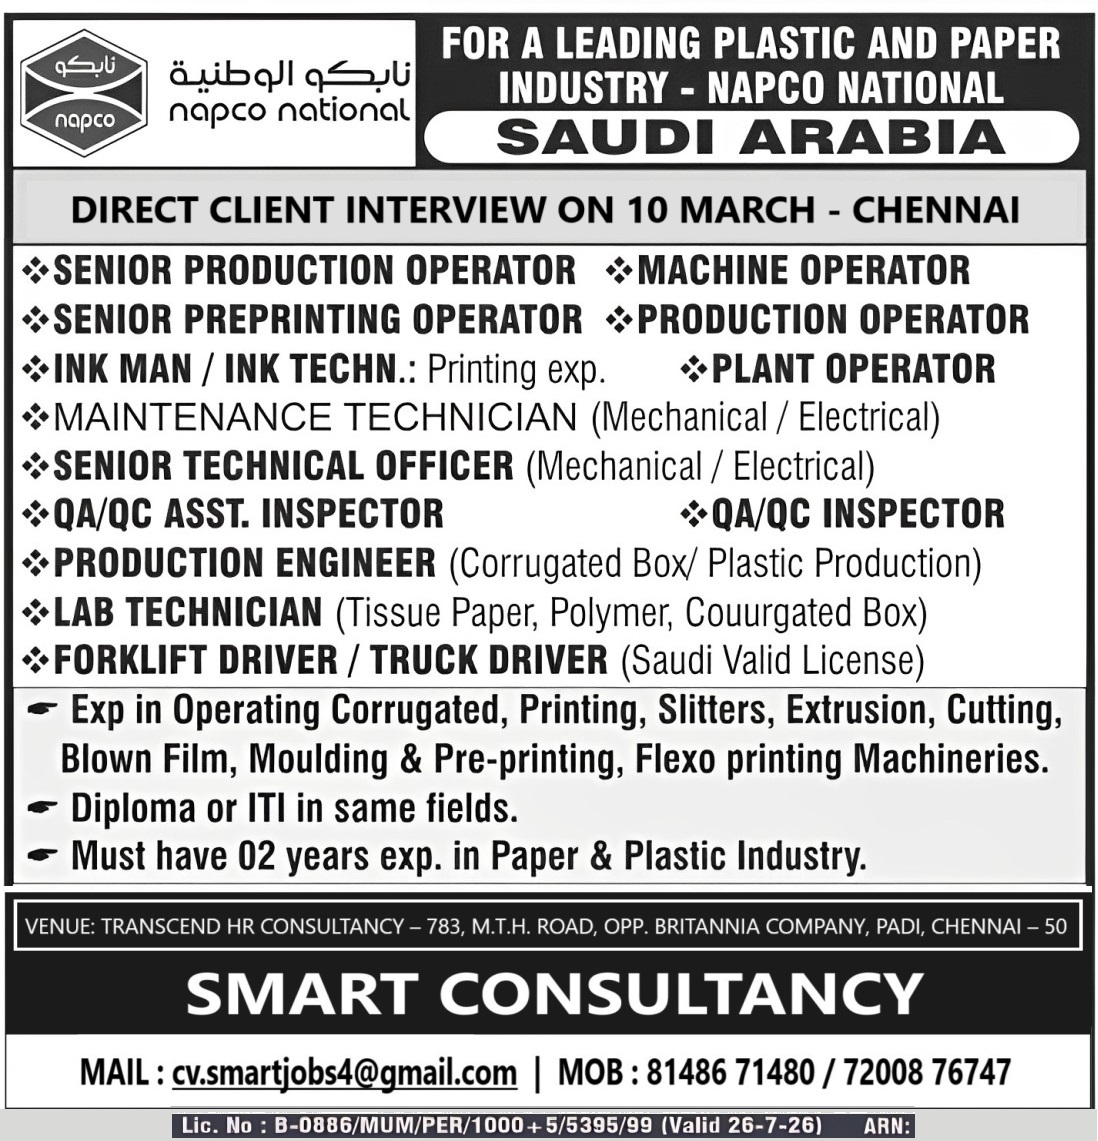 WANTED FOR A LEADING PLASTIC & PAPER INDUSTRIAL COMPANY – SAUDI / DIRECT CLIENT INTERVIEW ON 10 MARCH – CHENNAI